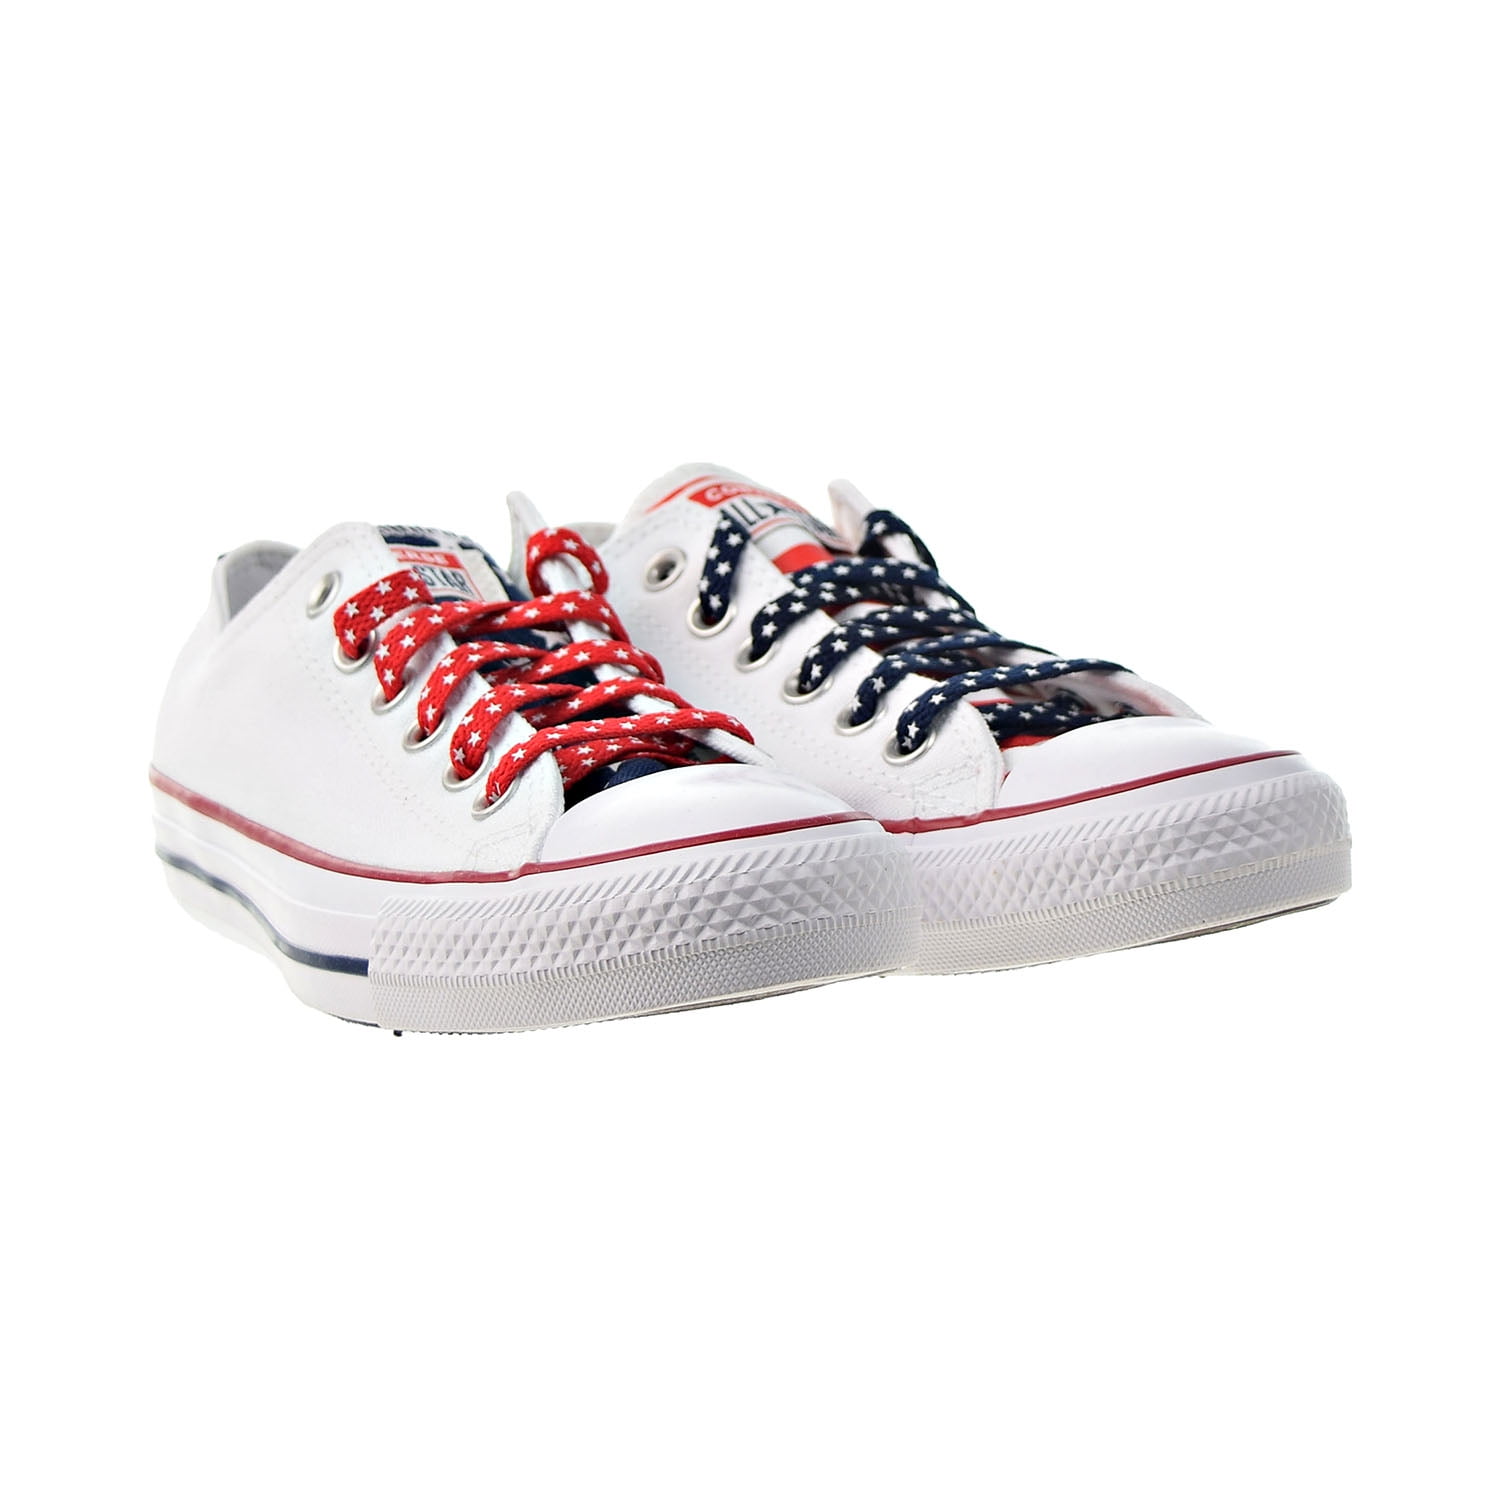 Converse Taylor All Star Stars & Stripes Shoes White-Red 170815f - Walmart.com